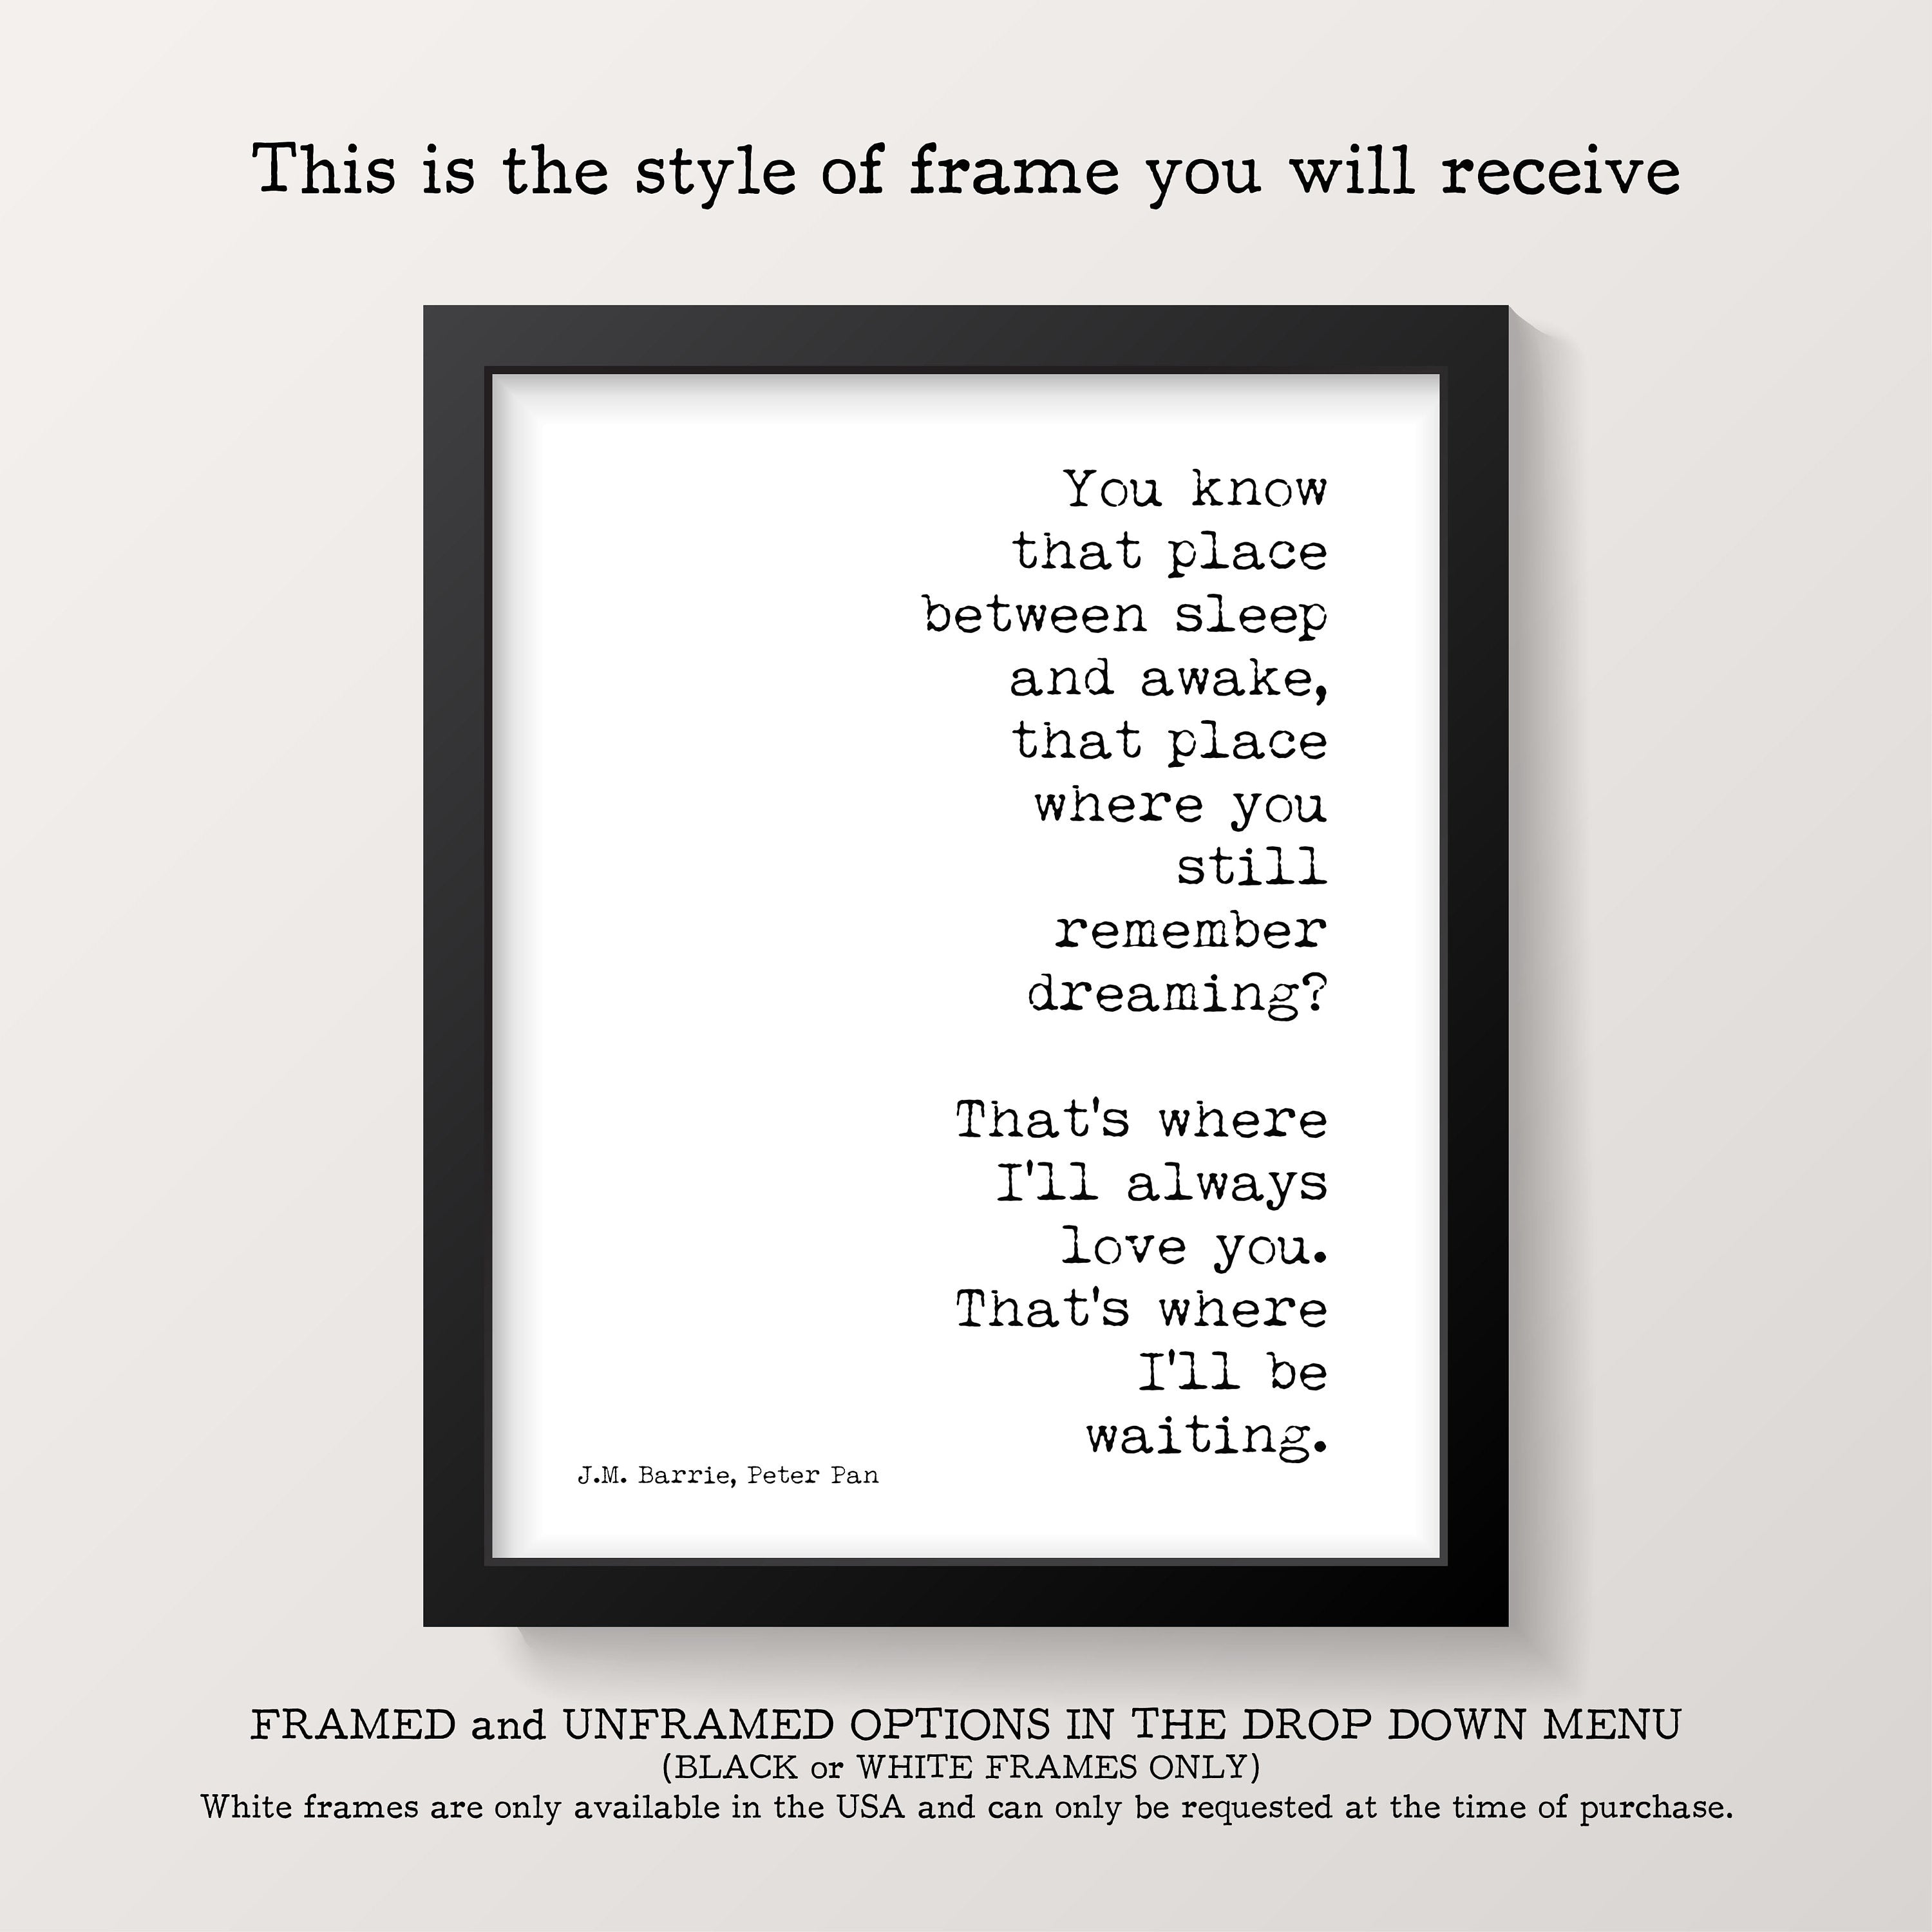 Mark Twain Quote Print, Too much of anything is bad